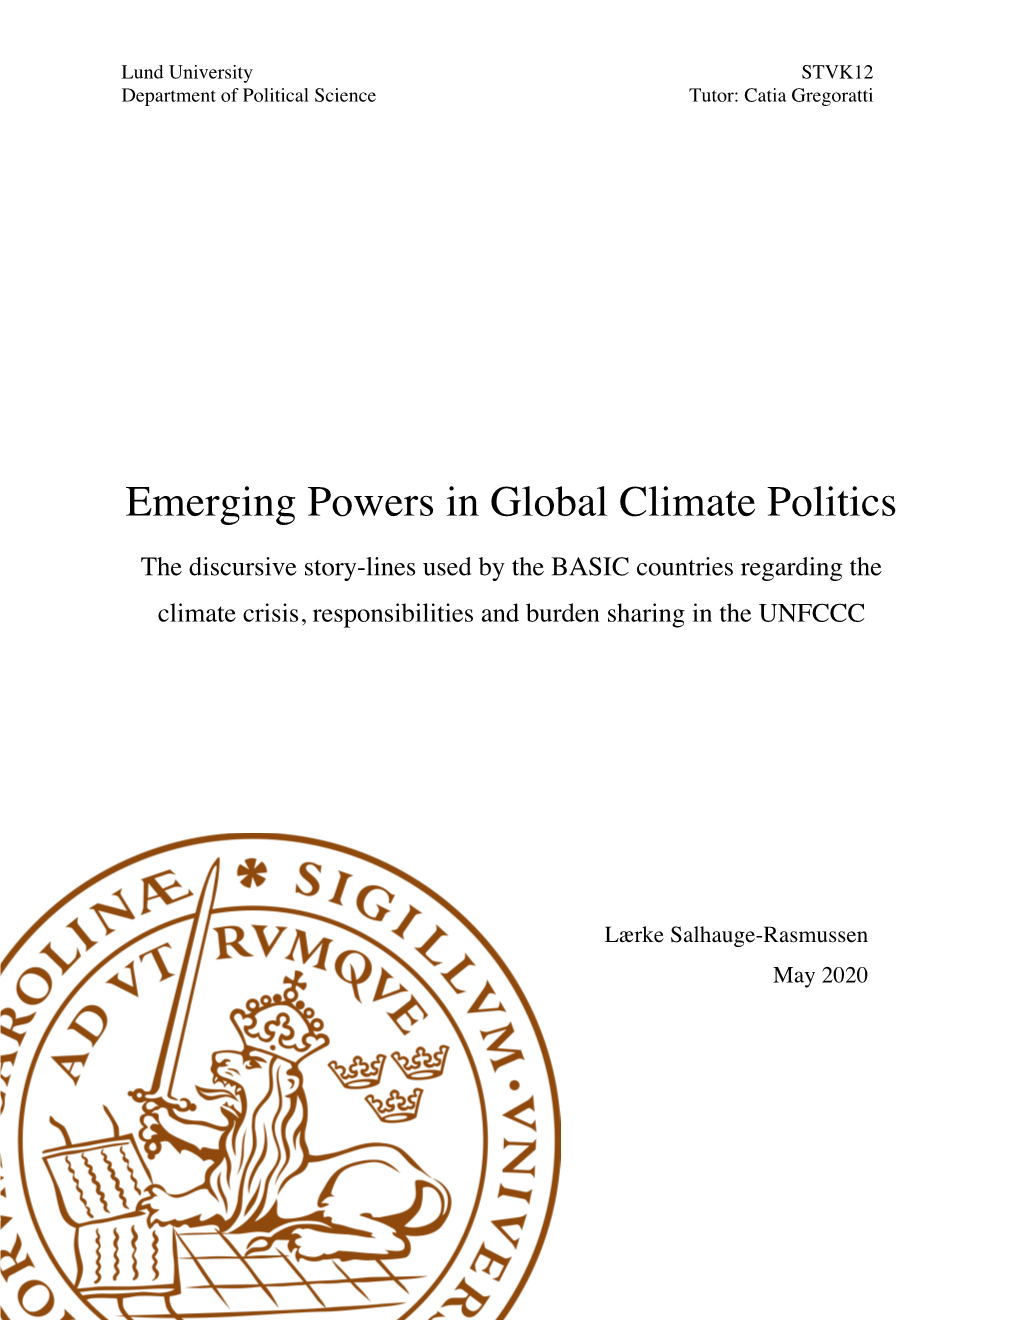 Emerging Powers in Global Climate Politics